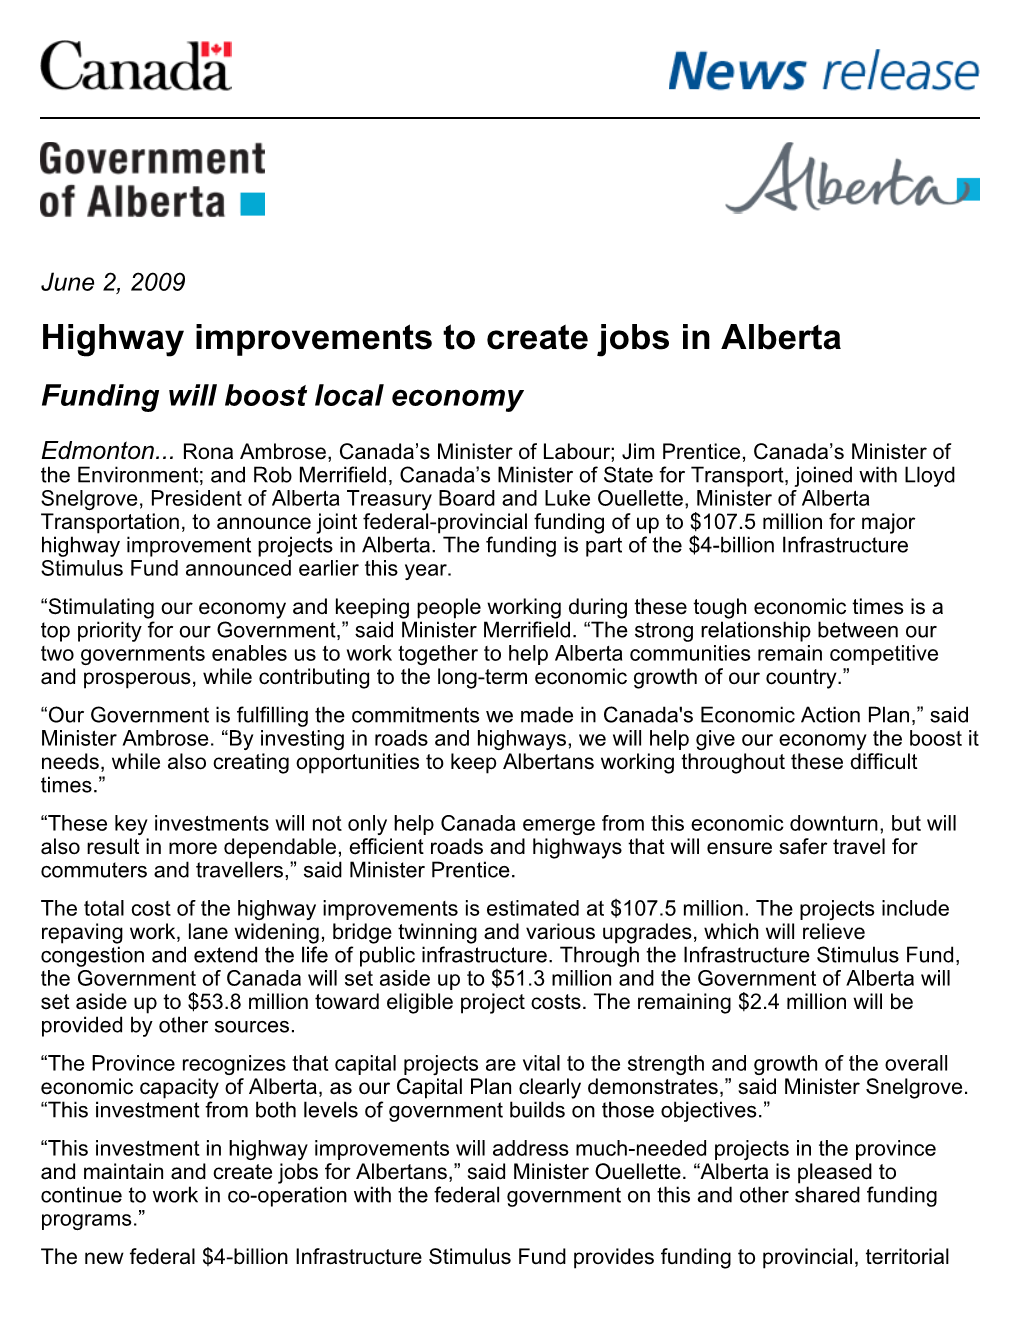 Highway Improvements to Create Jobs in Alberta Funding Will Boost Local Economy